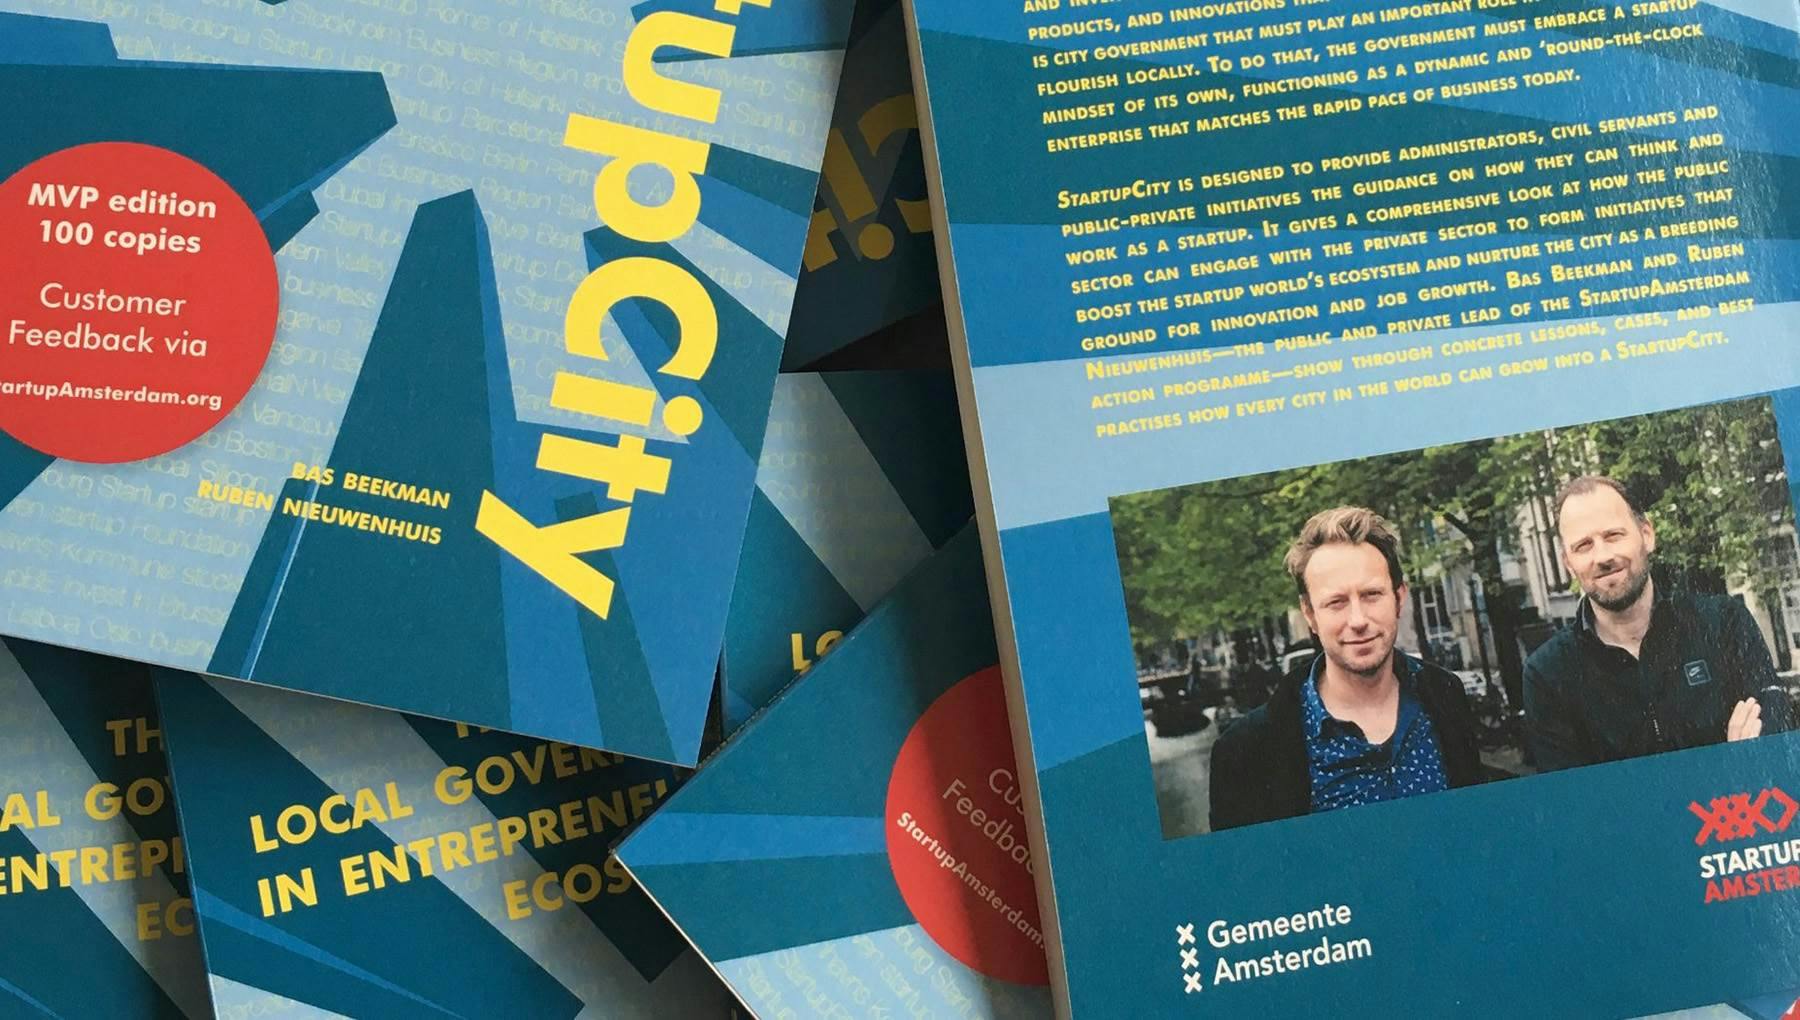 The StartupCity book: a manual for local governments